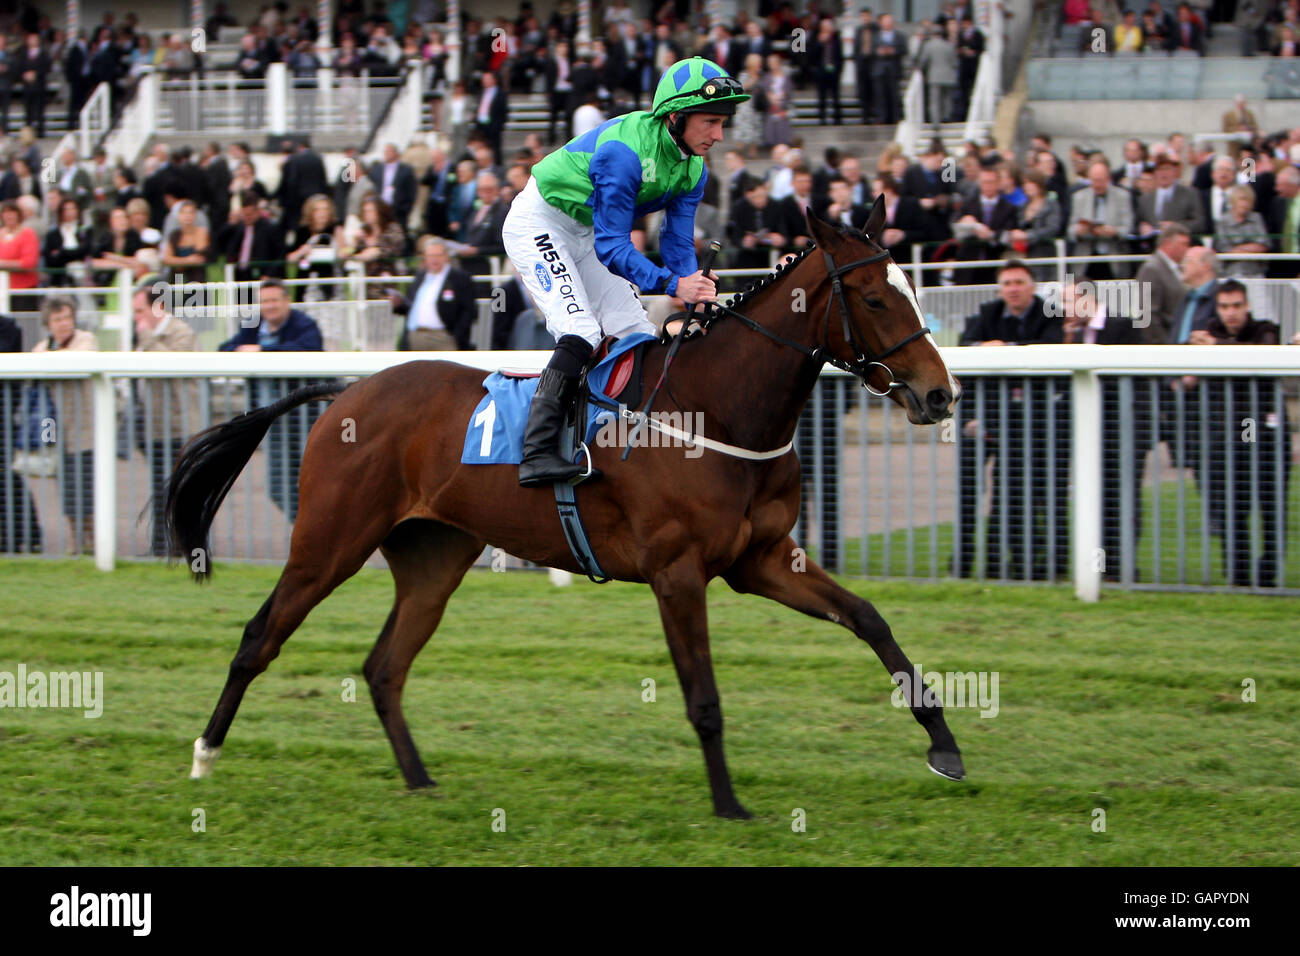 Aspen Darlin ridden by jockey Paul Hanagan competes in the Emirates Airline Yorkshire Cup at York racecourse Stock Photo